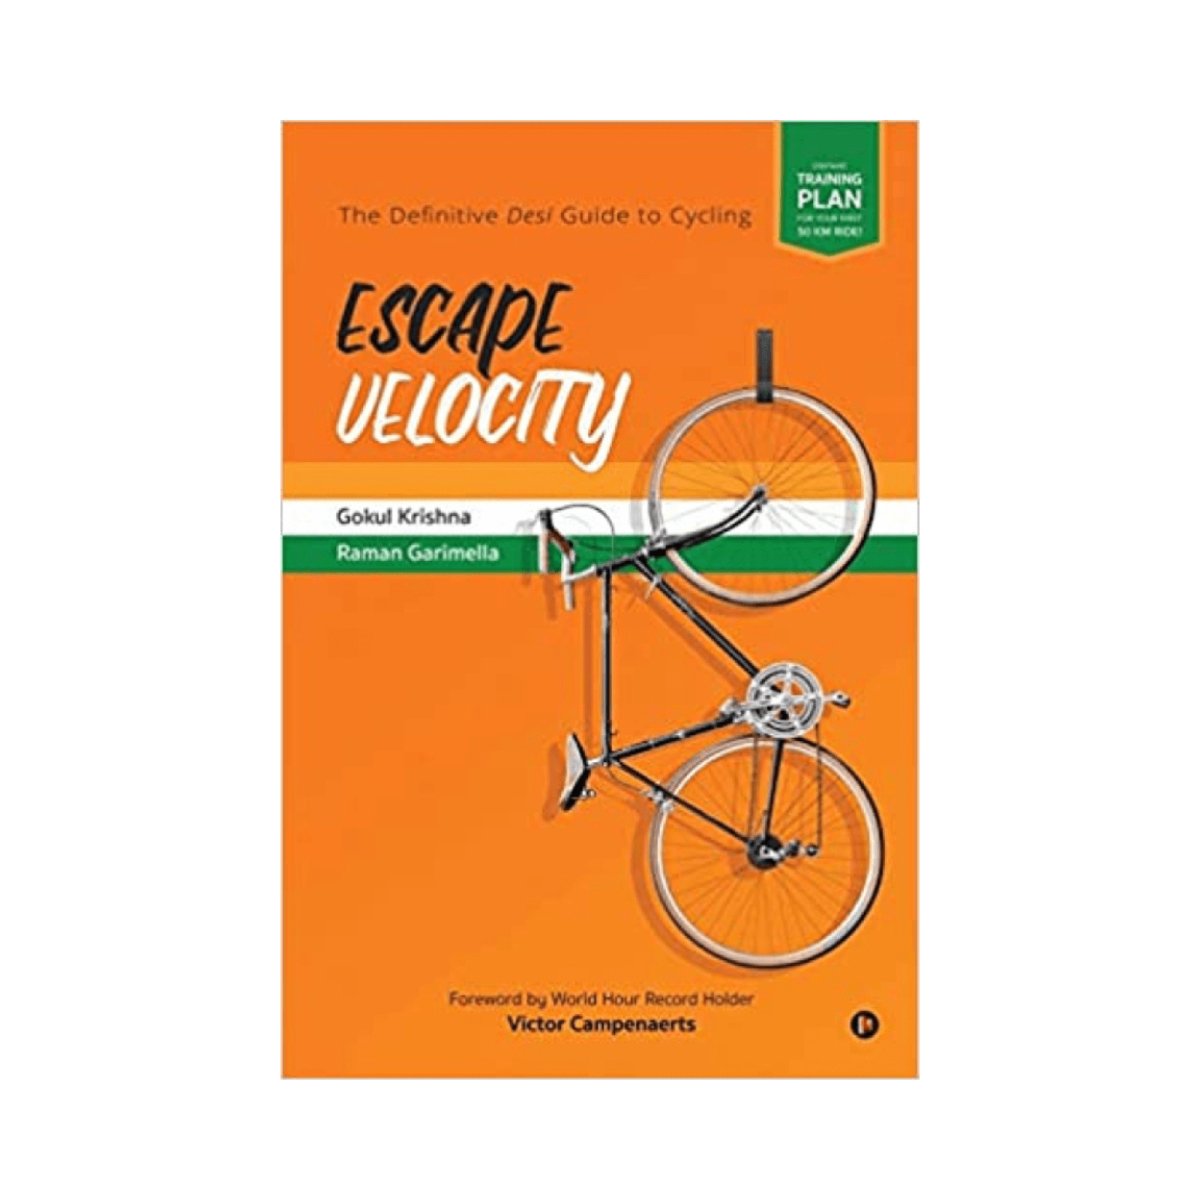 Escape Velocity: The Definitive Desi Guide to Cycling Book | The Bike Affair